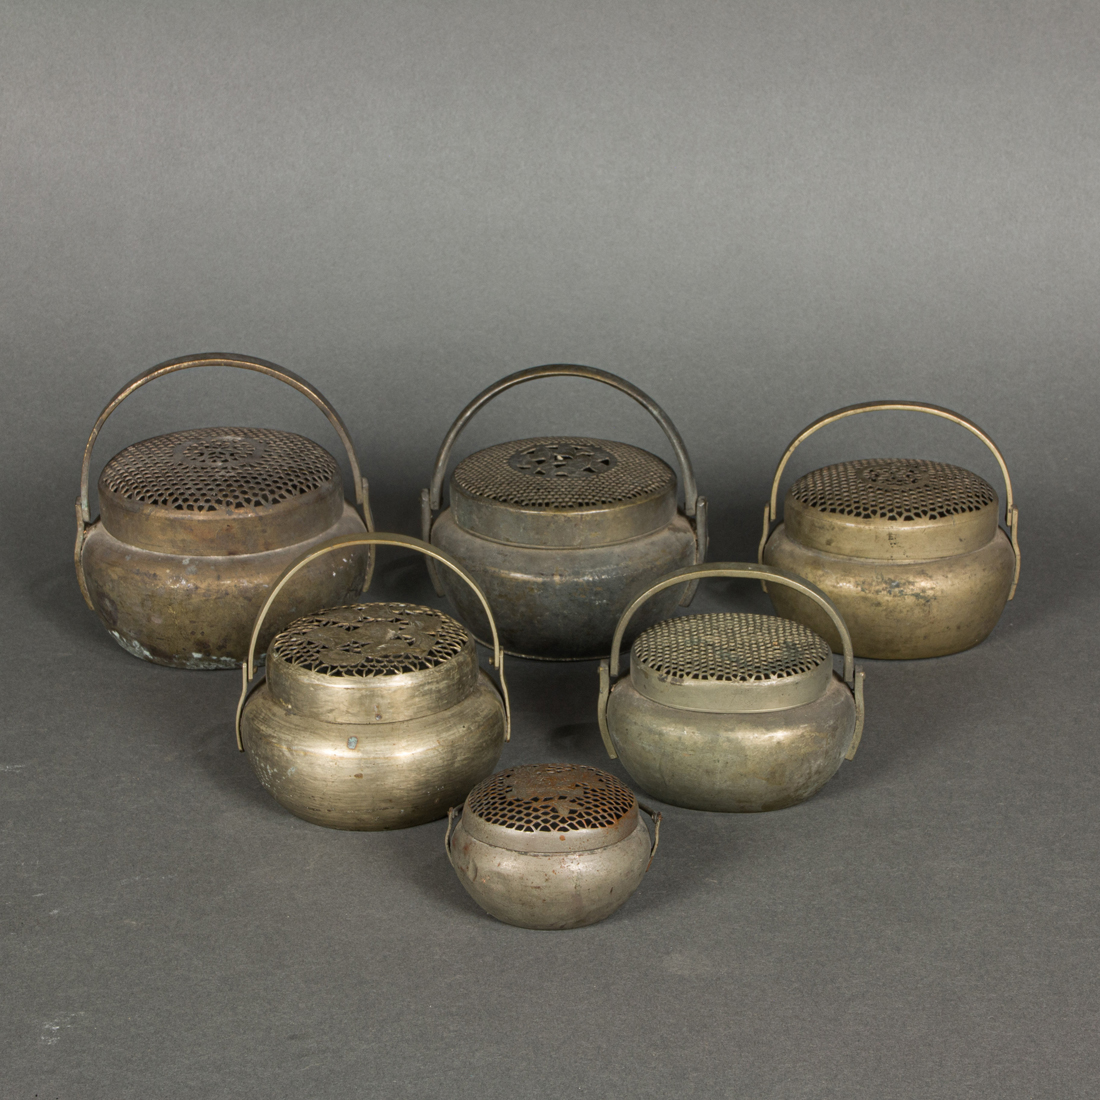  LOT OF 6 CHINESE BRASS HAND WARMERS 3cdff9